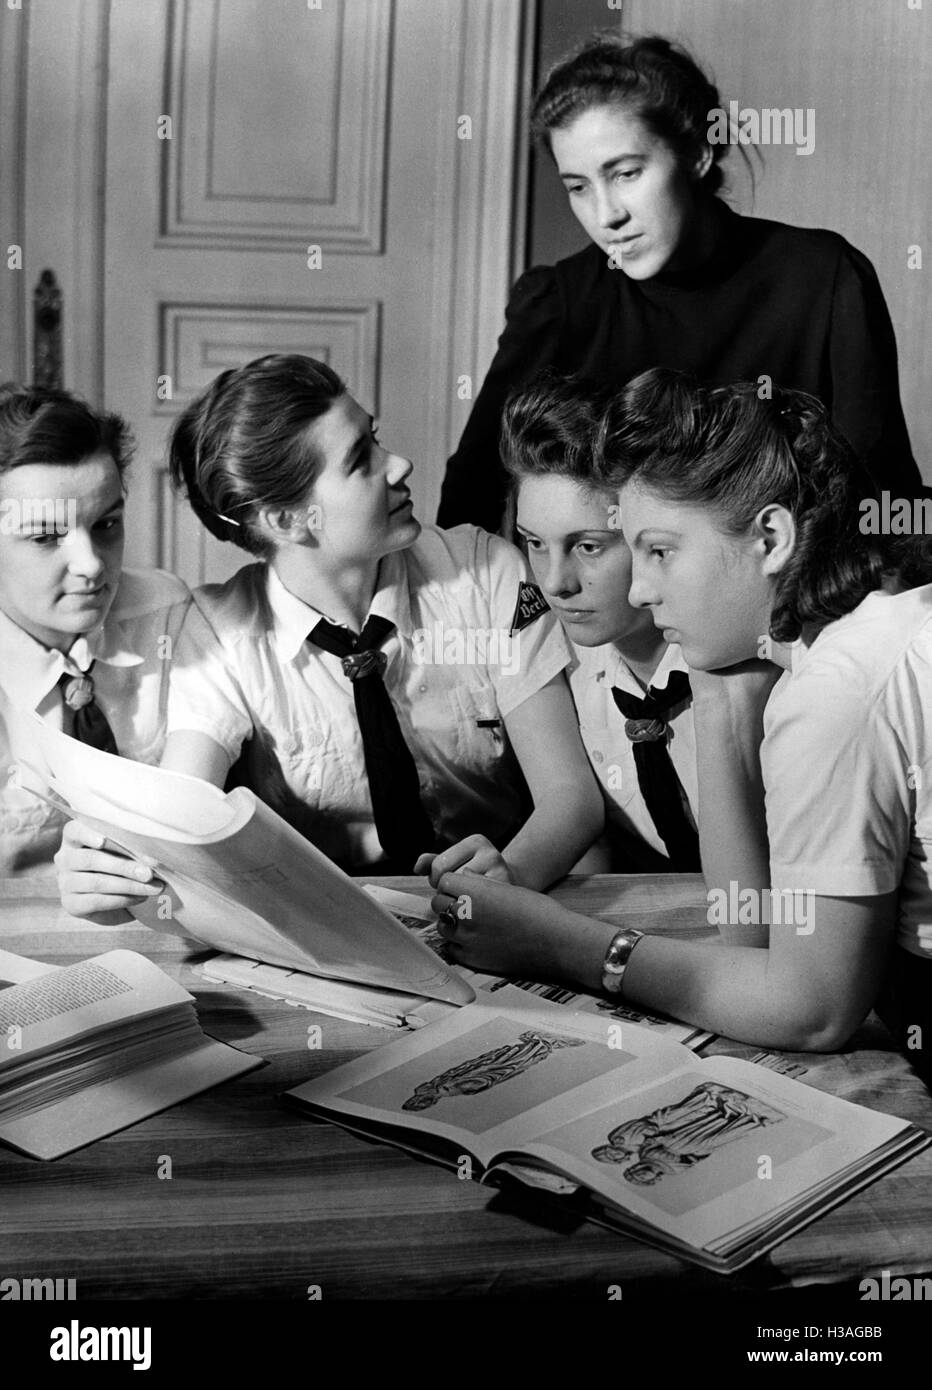 Members of the BDM-Werk Glaube und Schoenheit (BDM-Work, Faith and Beauty Society) during a social evening, 1941 Stock Photo